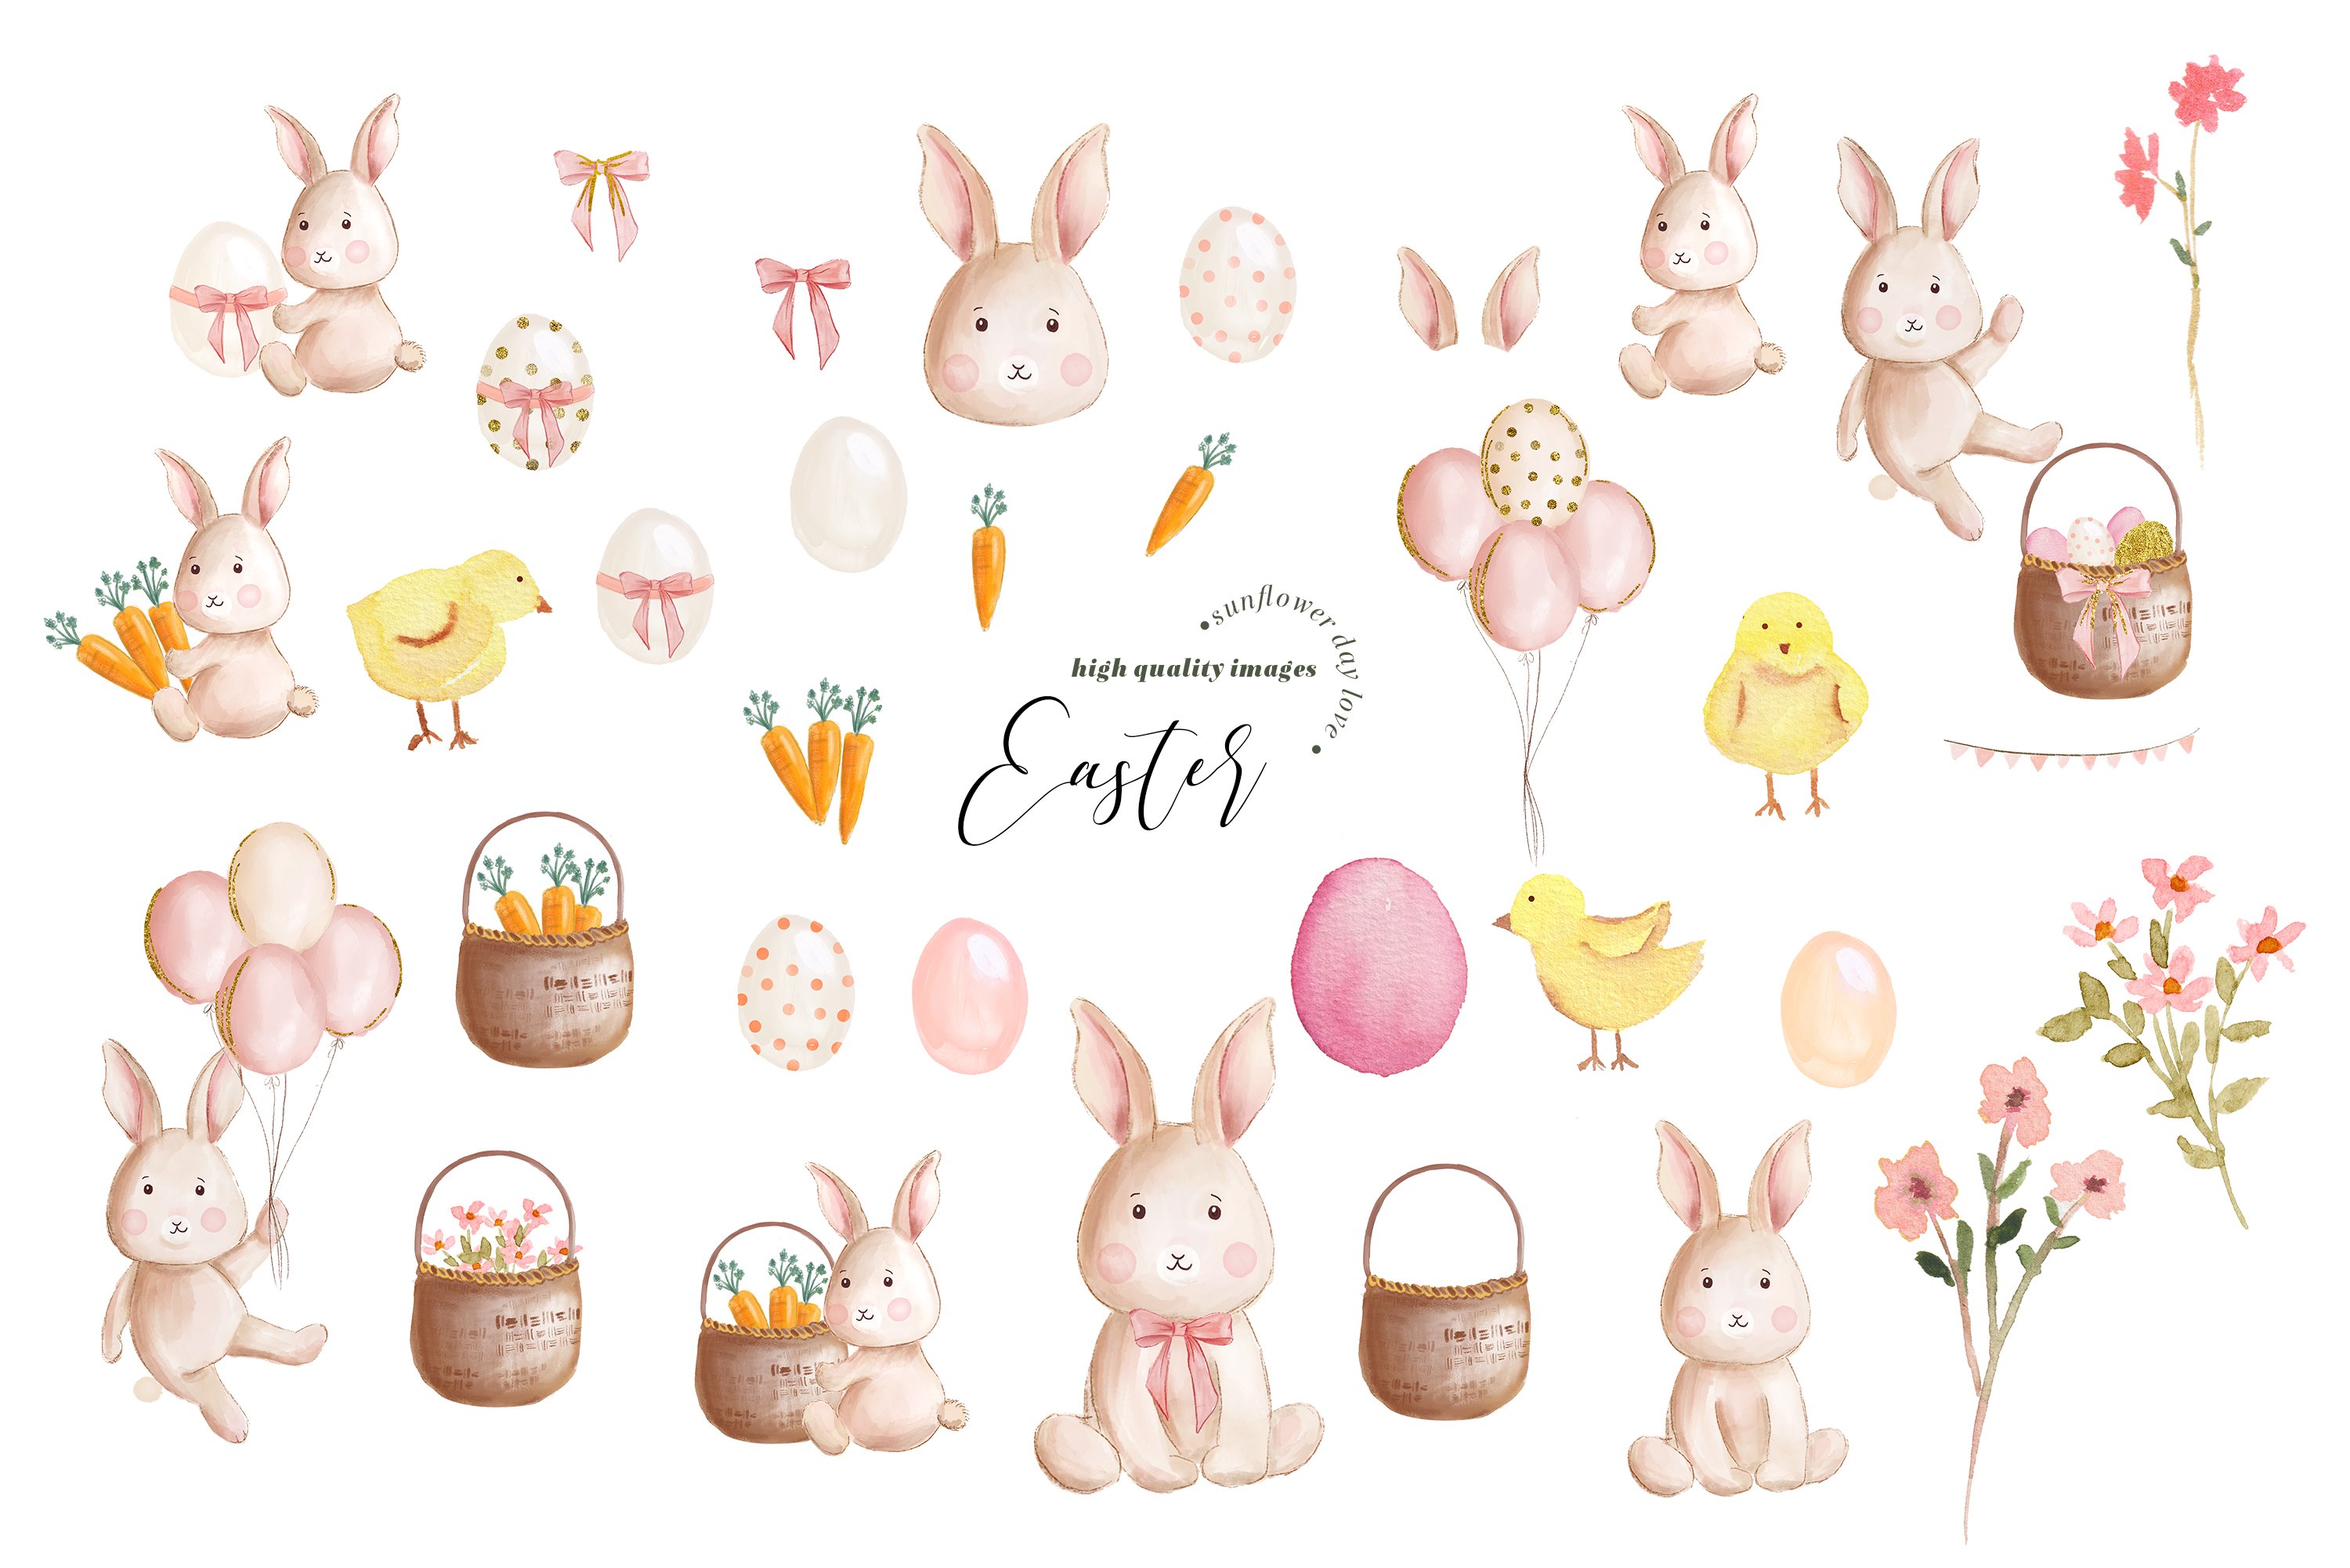 Cute Easter elements for the full festive compositions.